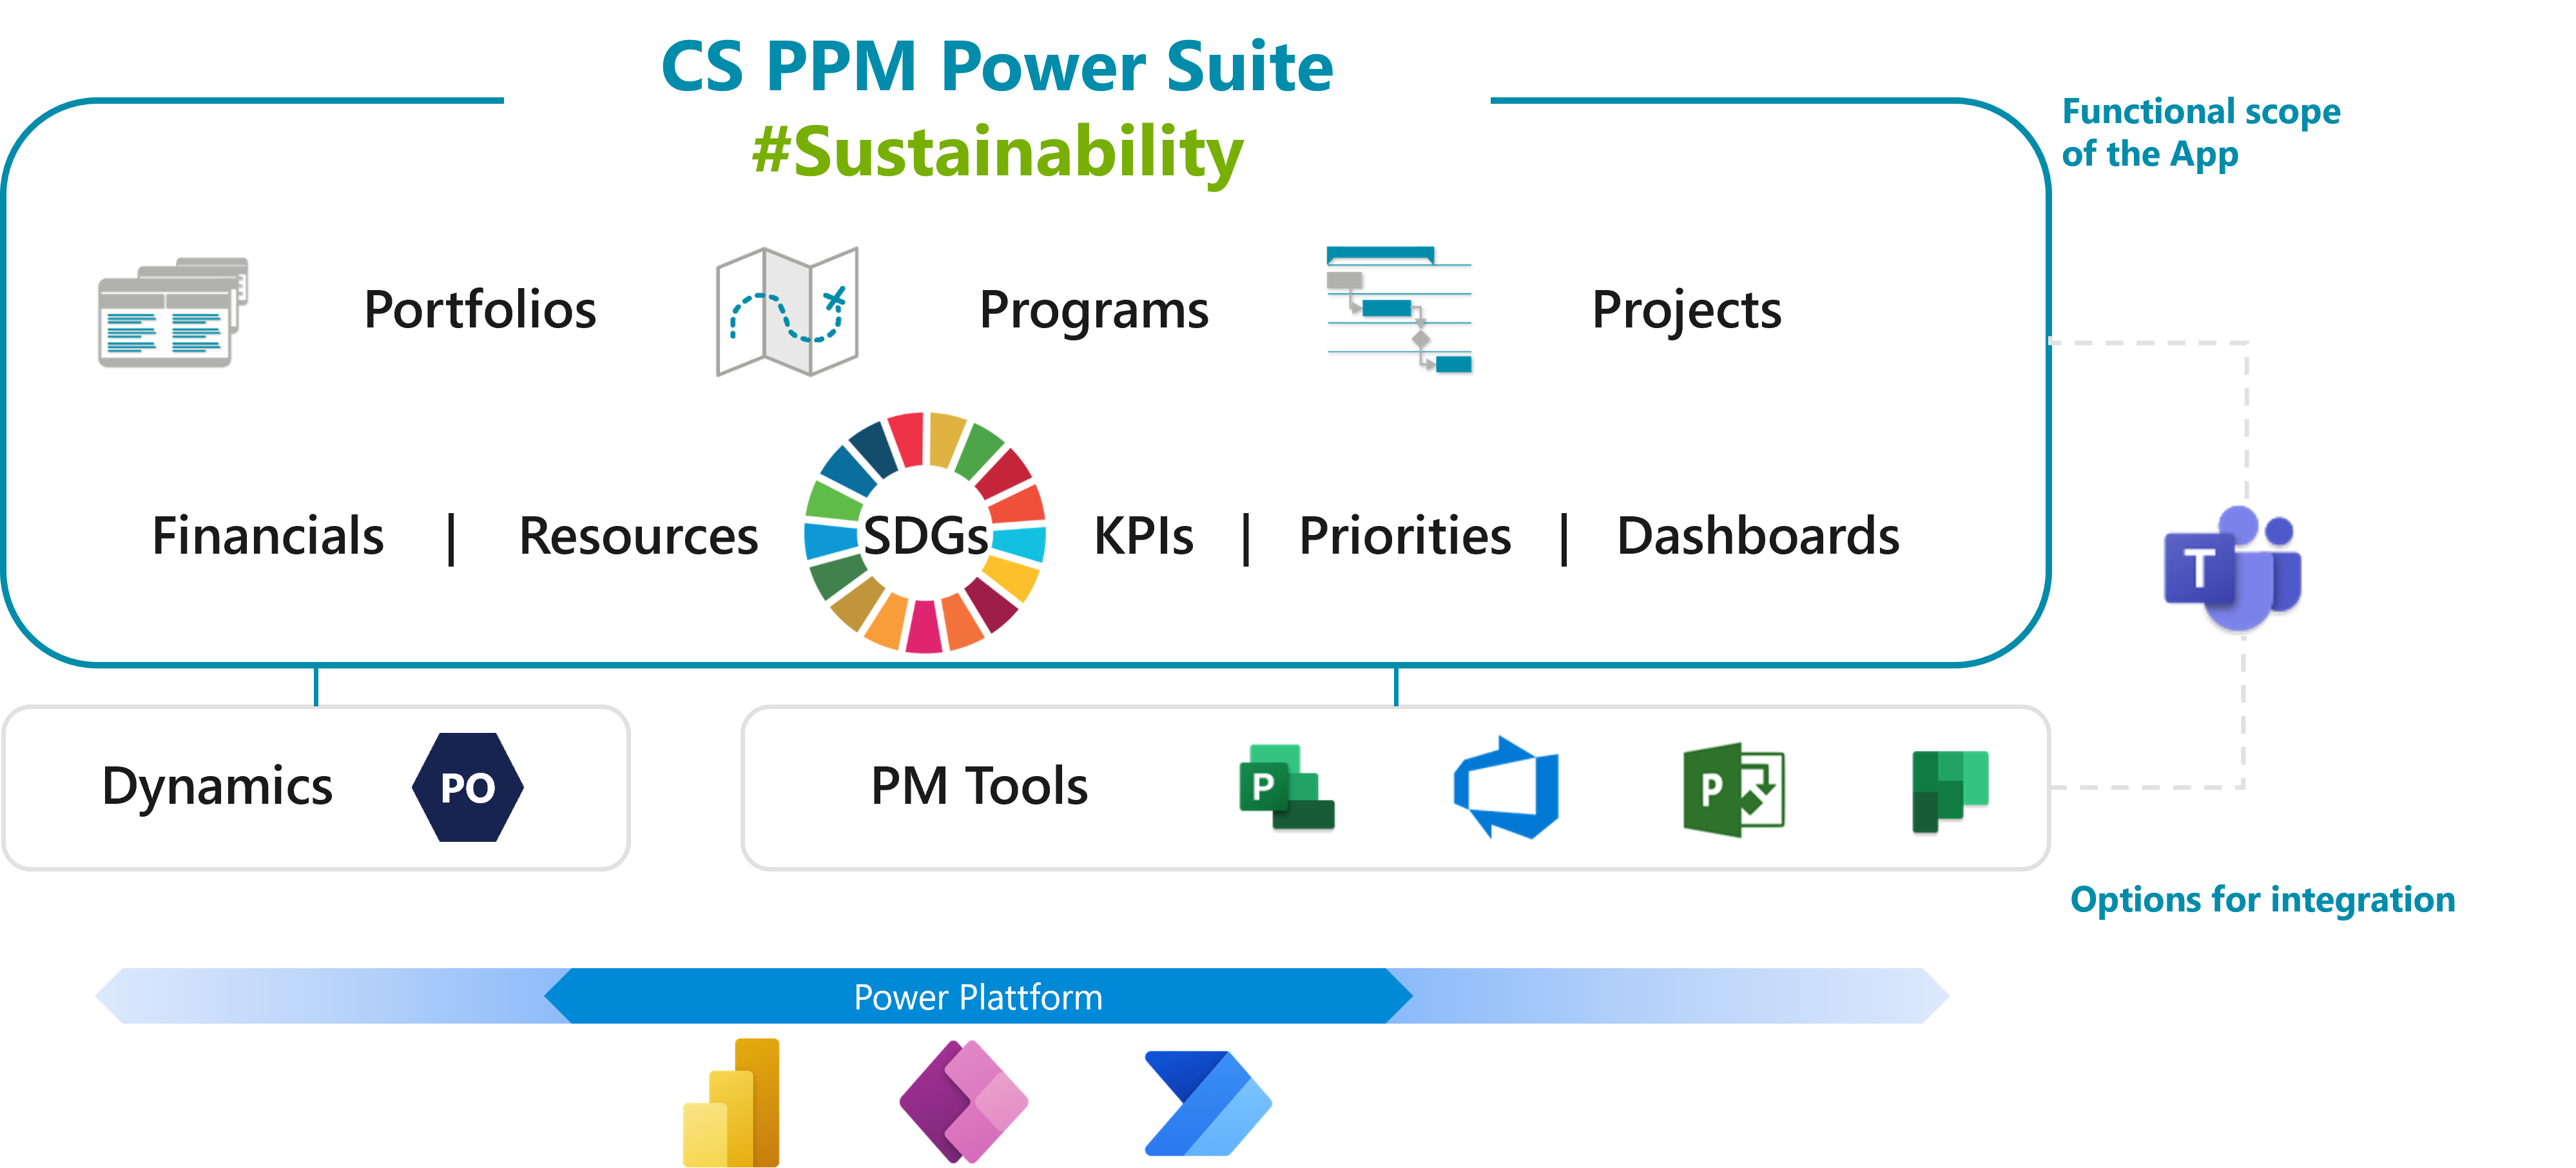 CS PPM Power Suite. A flexible platform to connect sustainability to PPM.